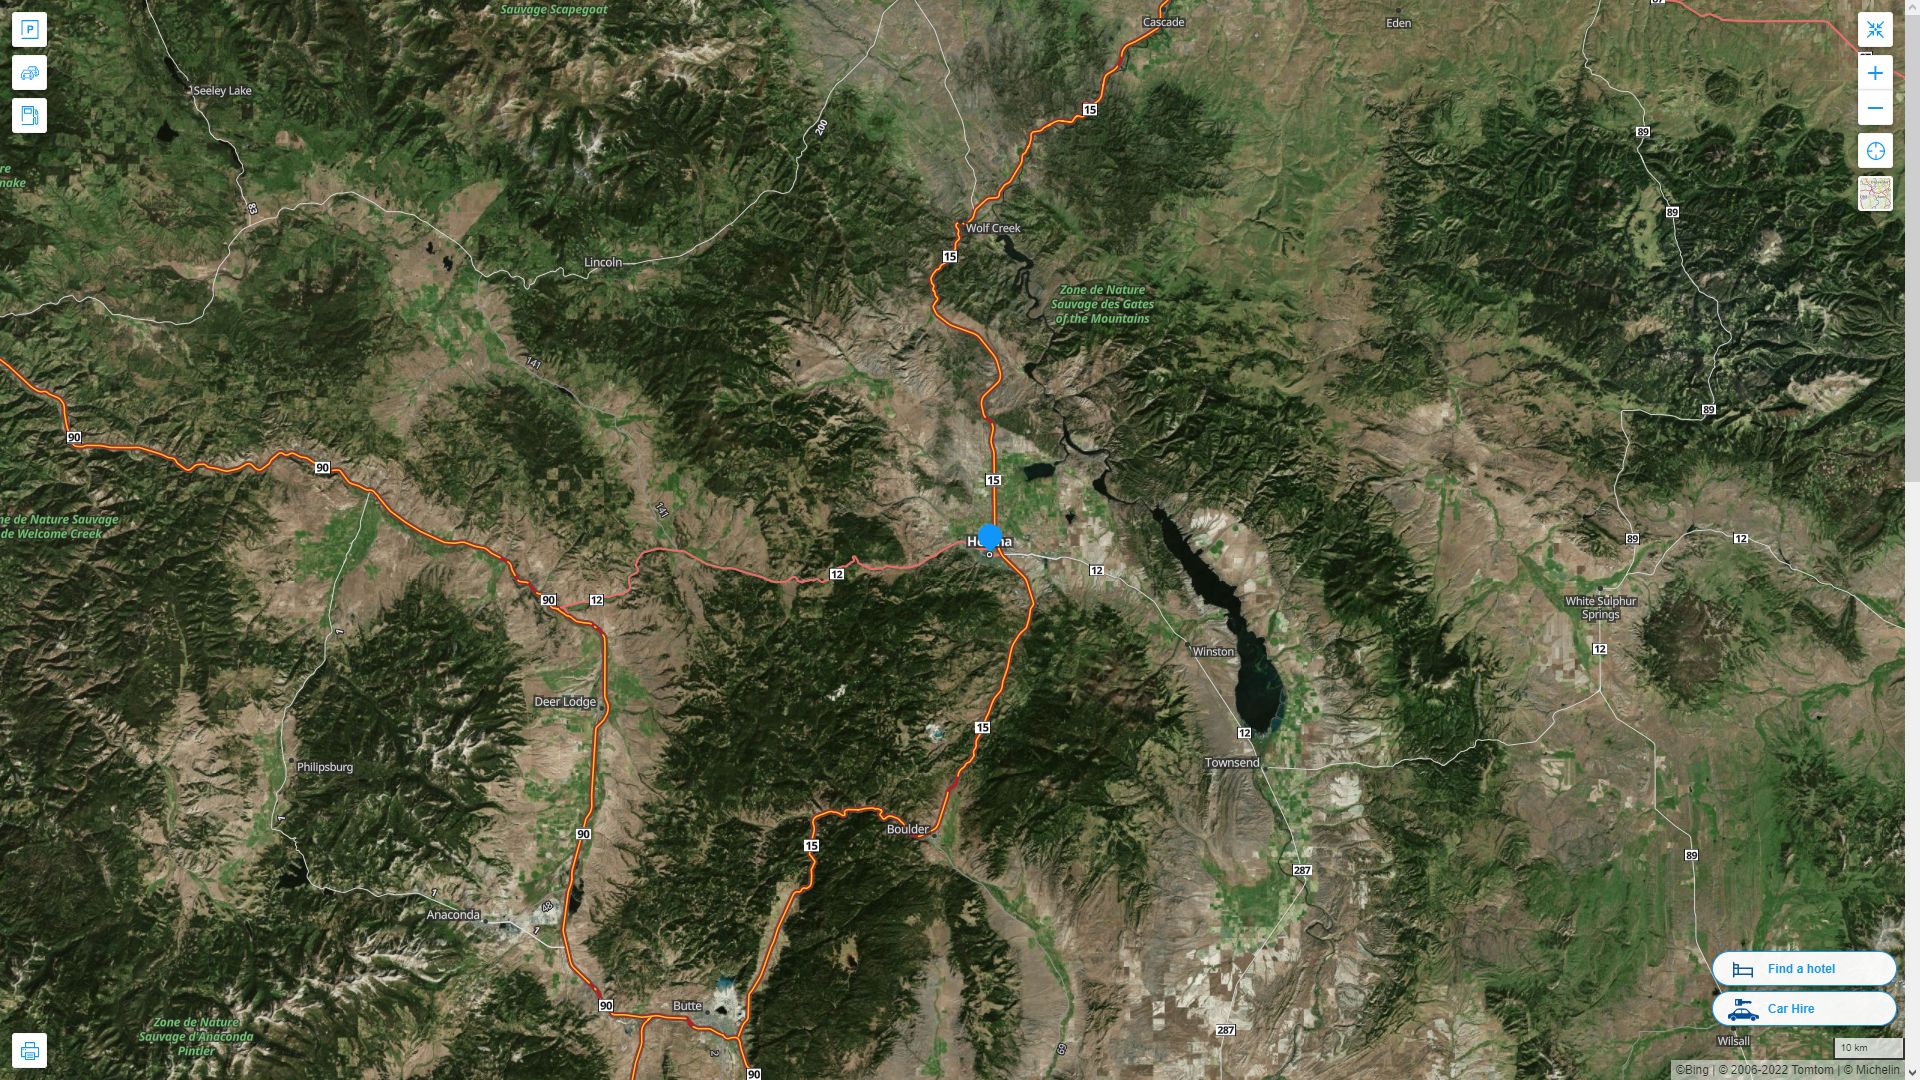 Helena Montana Highway and Road Map with Satellite View